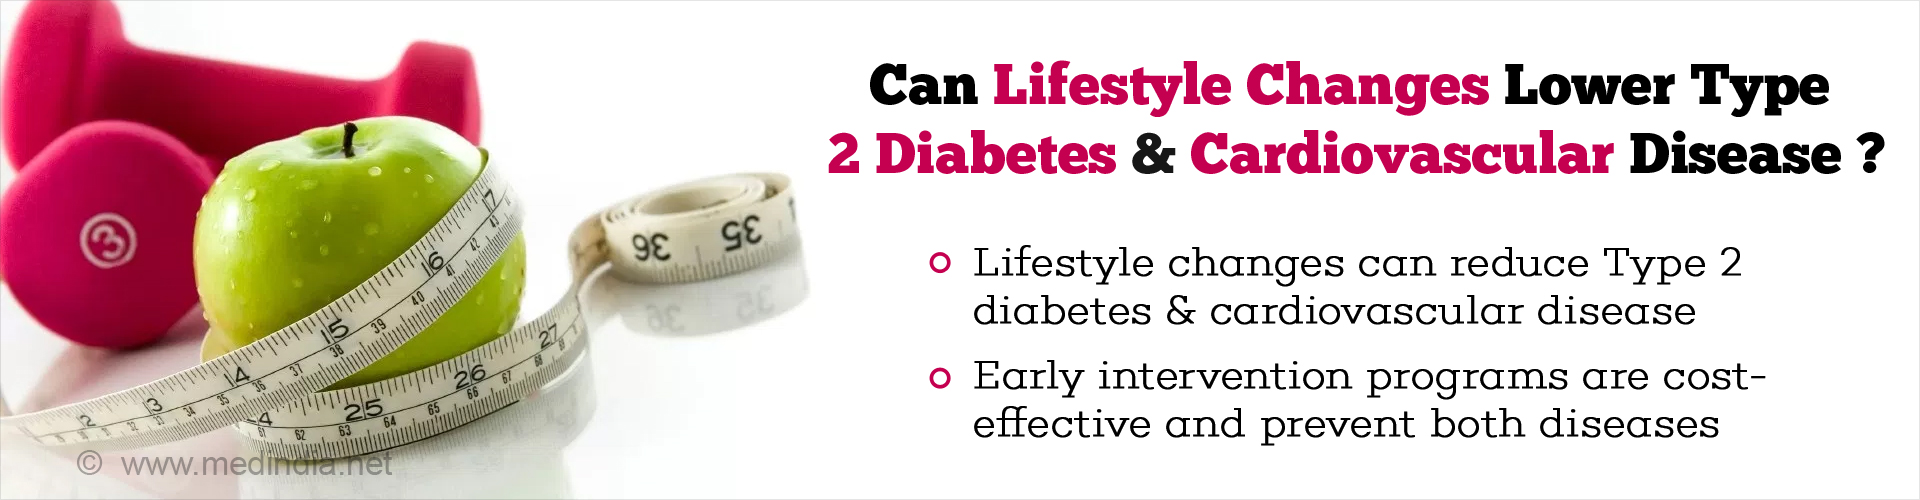 Can lifestyle changes lower Type 2 Diabetes & Cardiovascular Disease?
- Lifestyle changes can reduce Type 2 diabetes & cardiovascular disease
- Early intervention programs are cost-effect and prevent both diseases